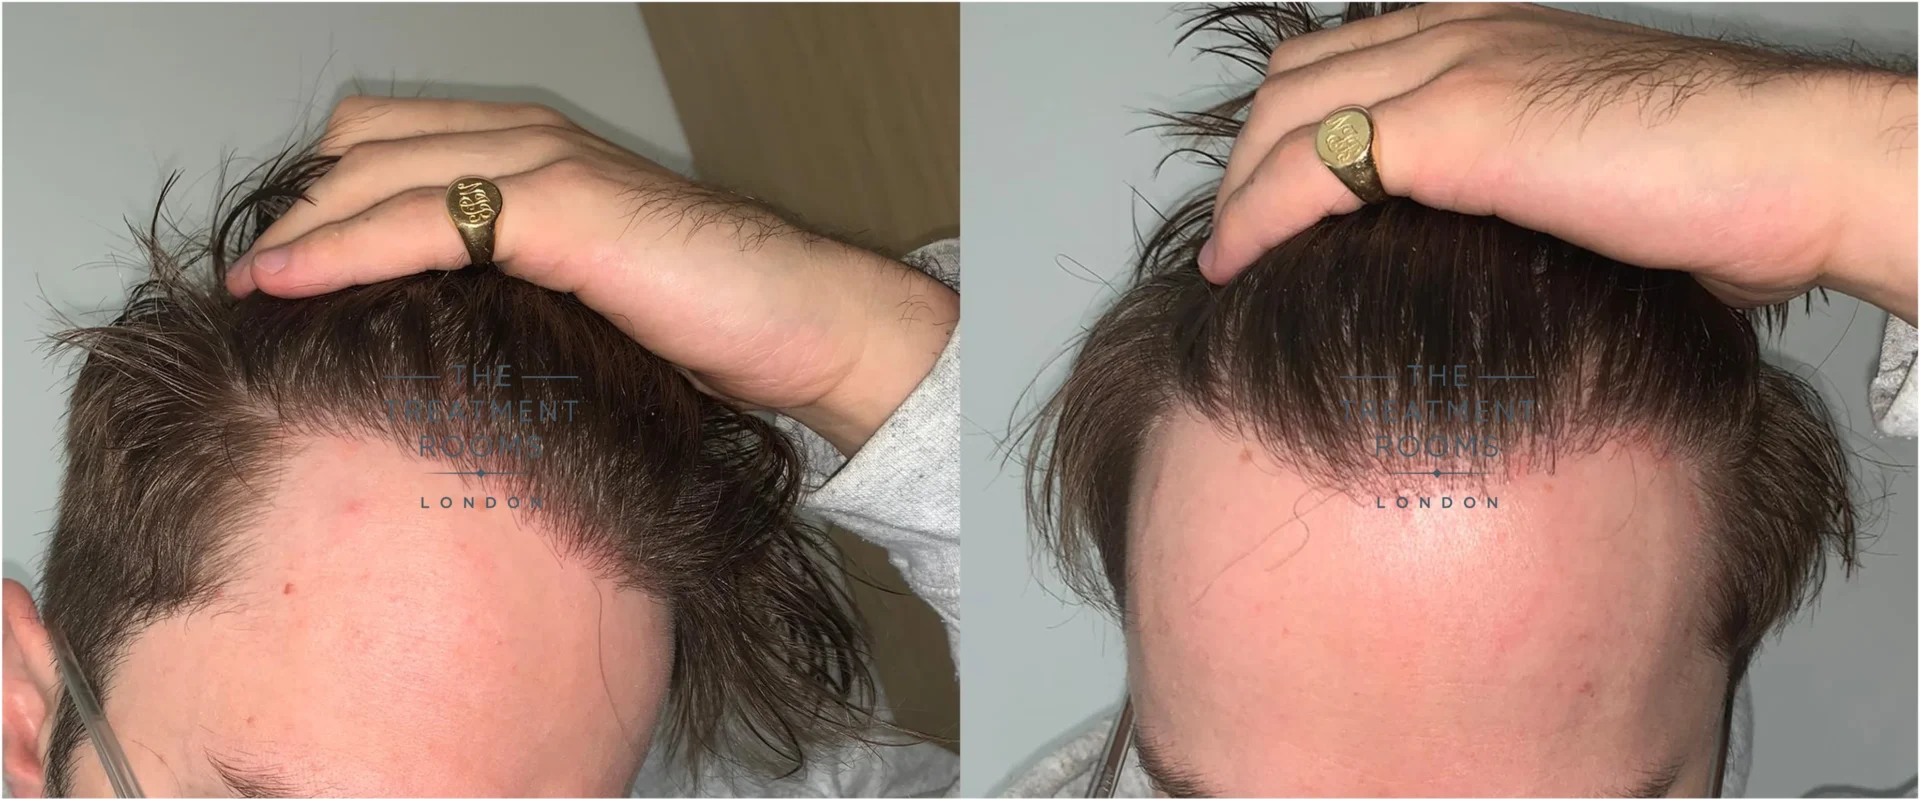 Unshaven hair transplant 1 year after surgery